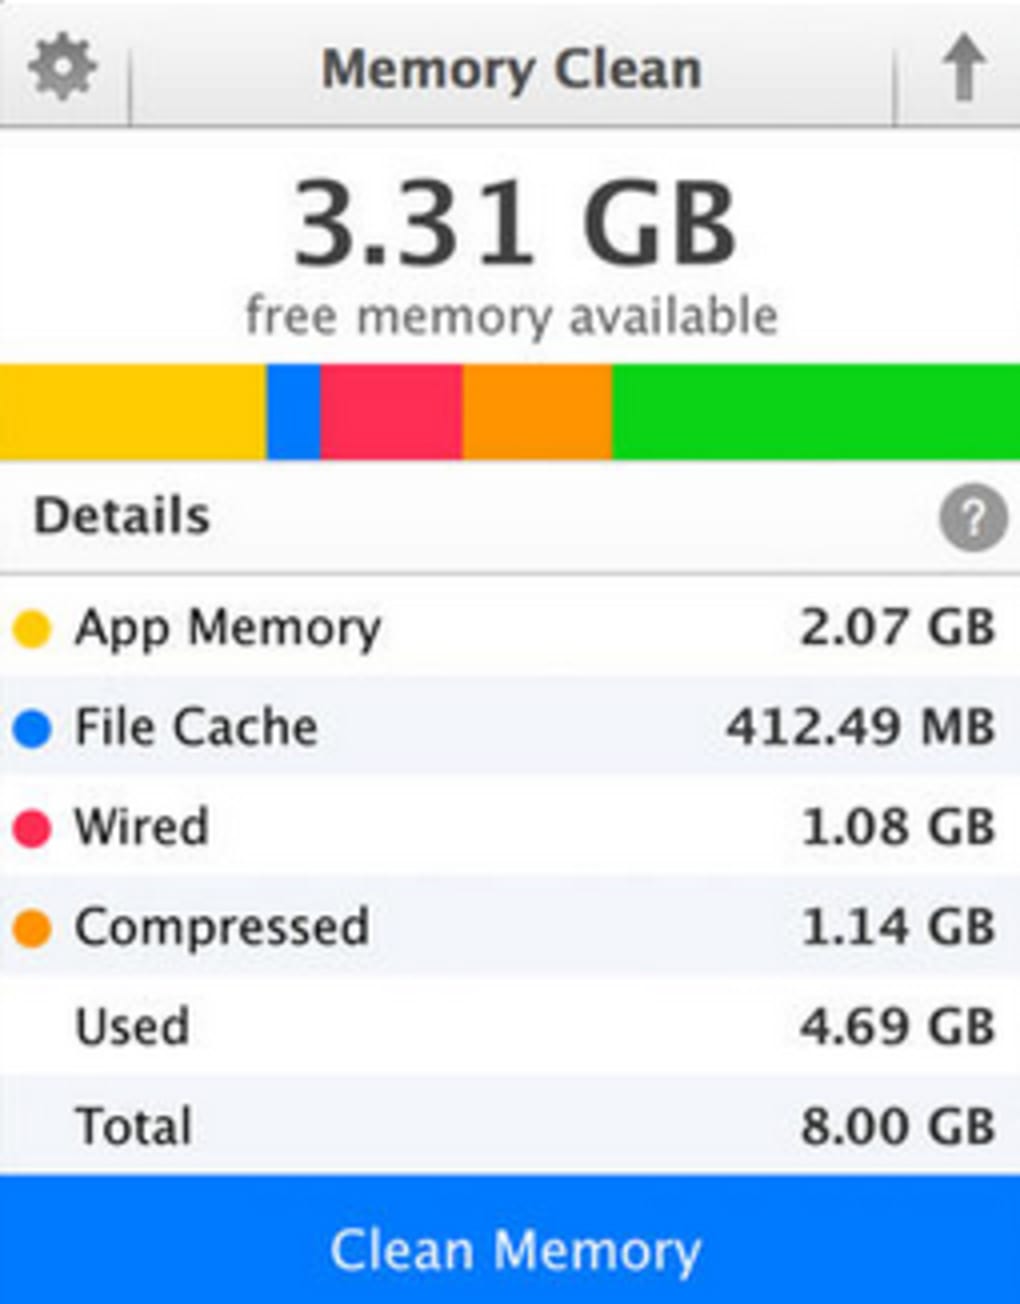 memory clean 2 to memory clean 3 upgrade